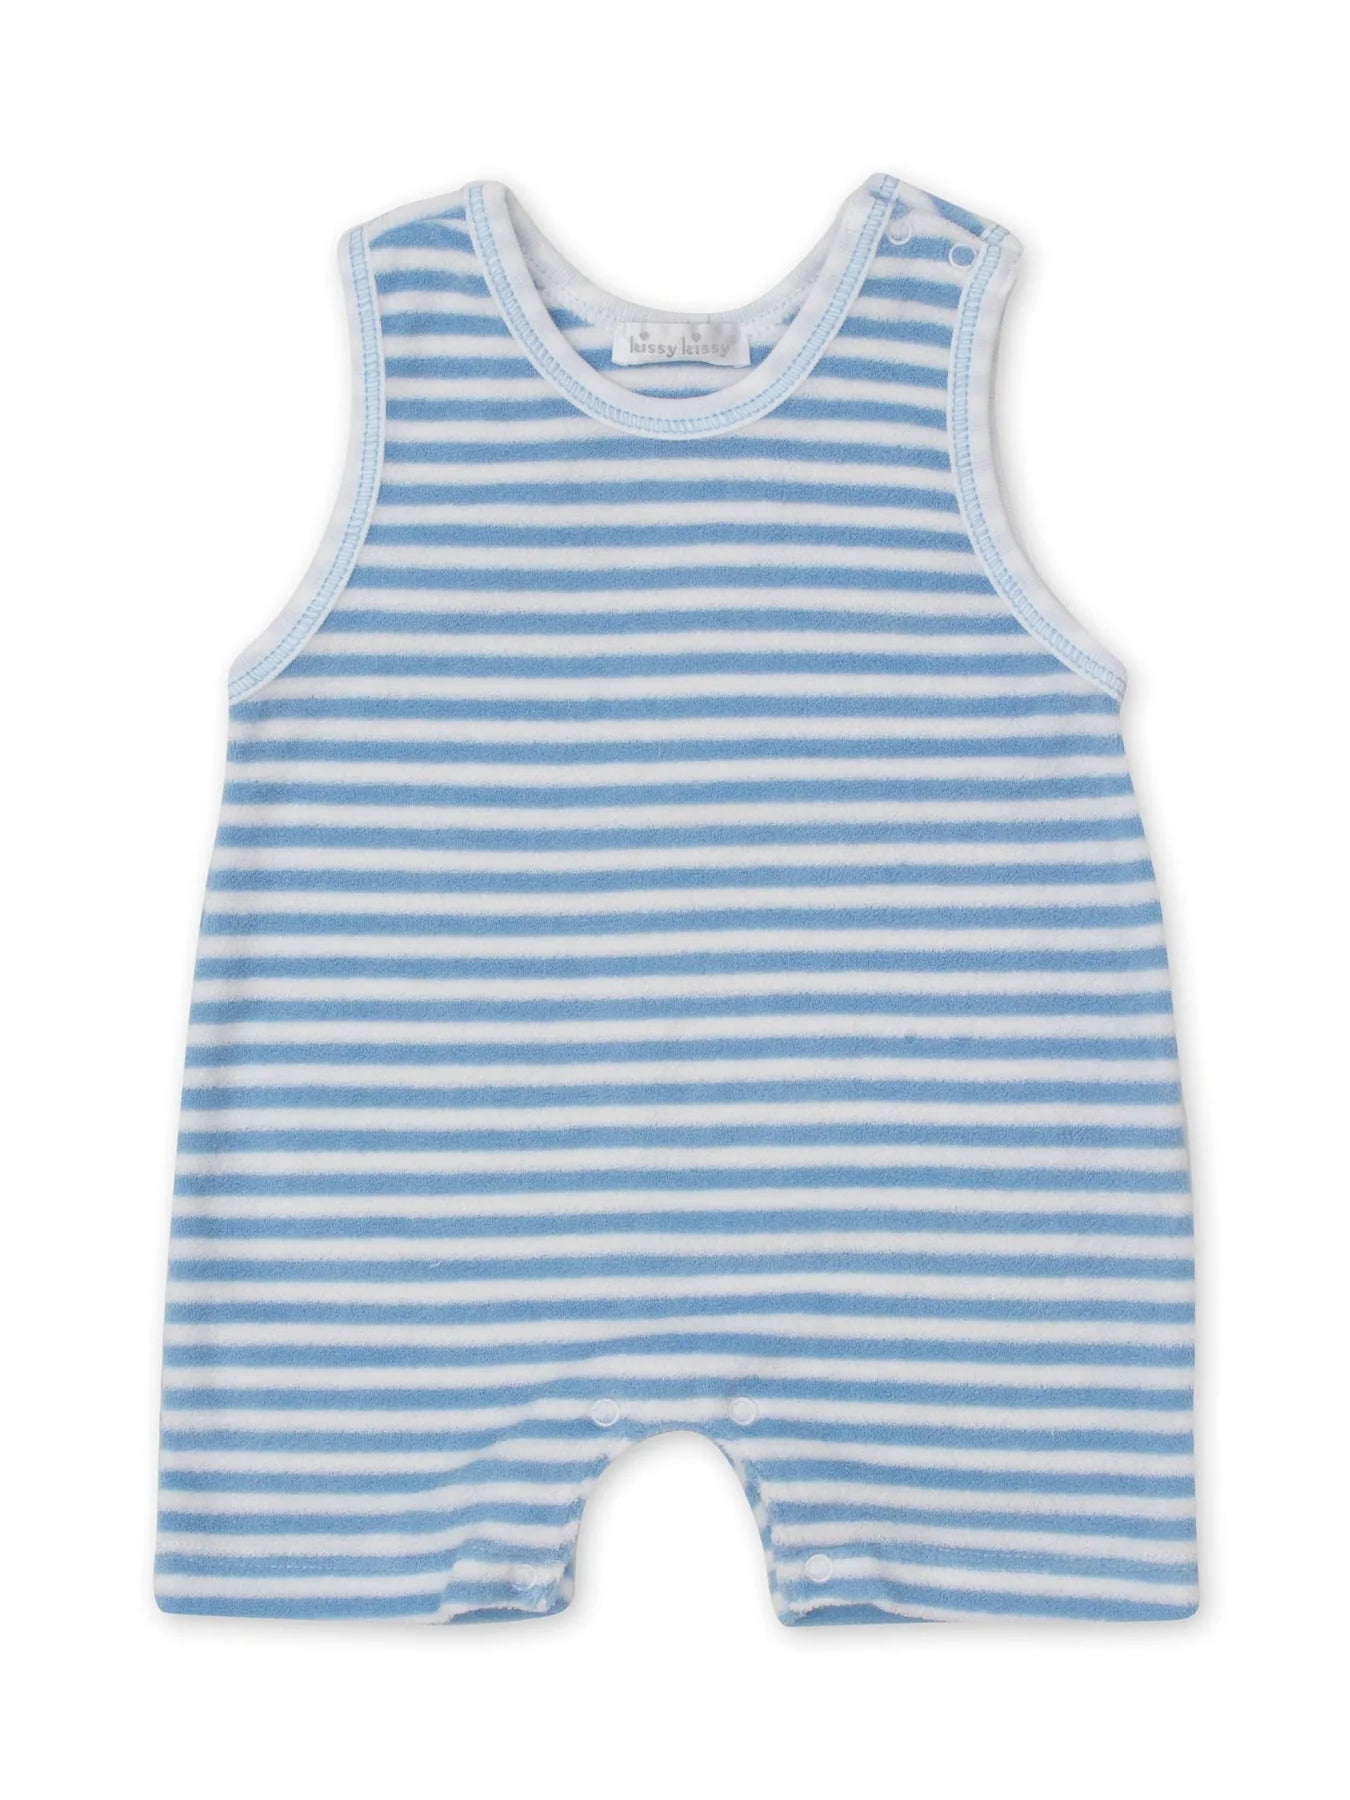 WHALE WATCH TERRY SLEEVELESS PLAYSUIT - BLUE